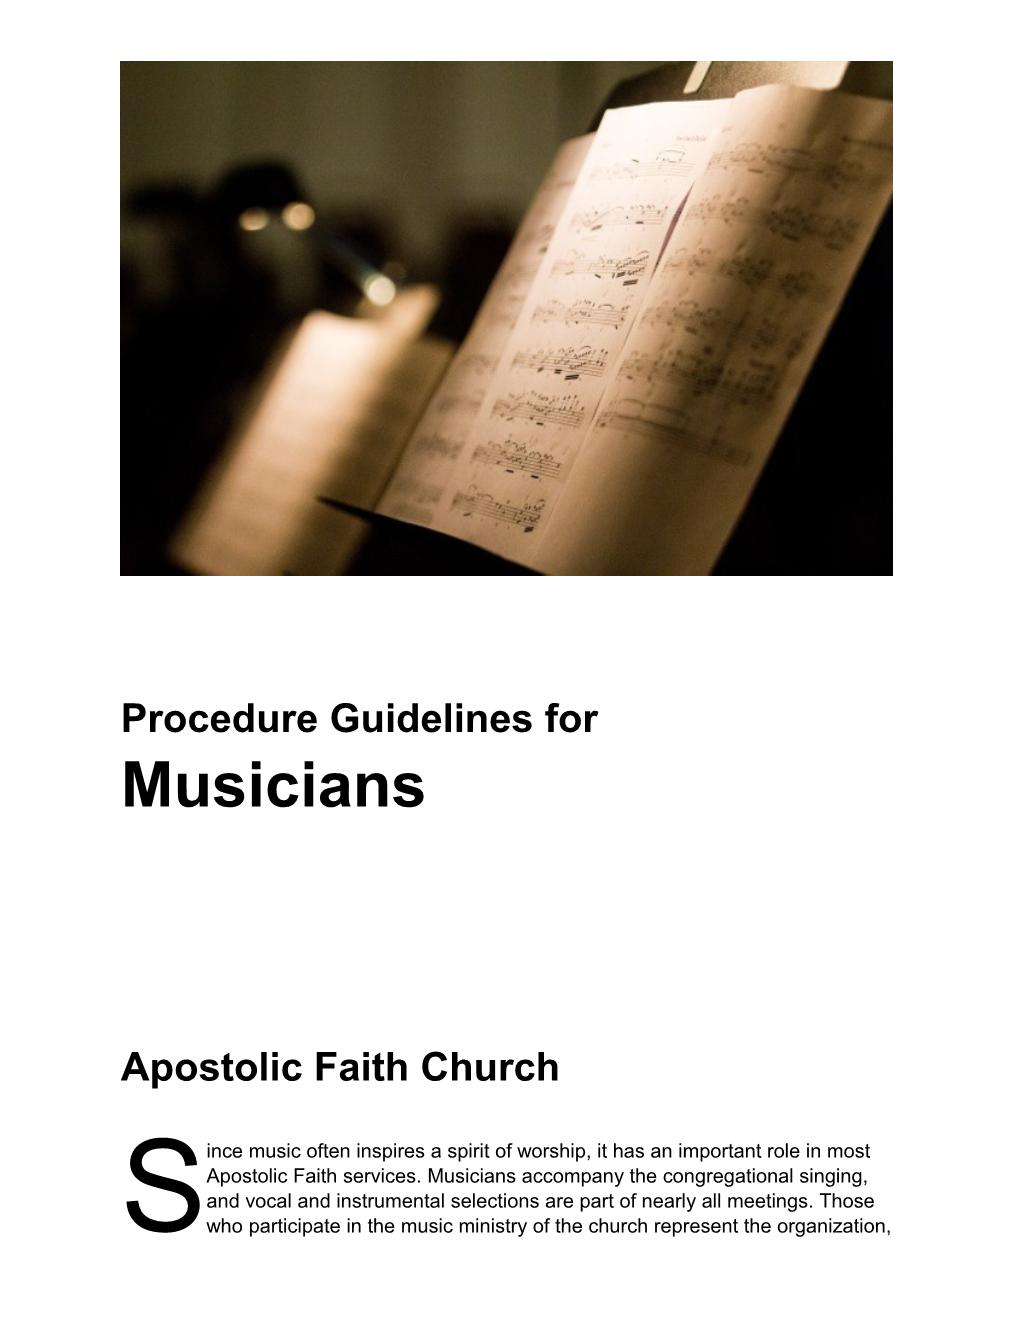 Procedure Guidelines for Musicians